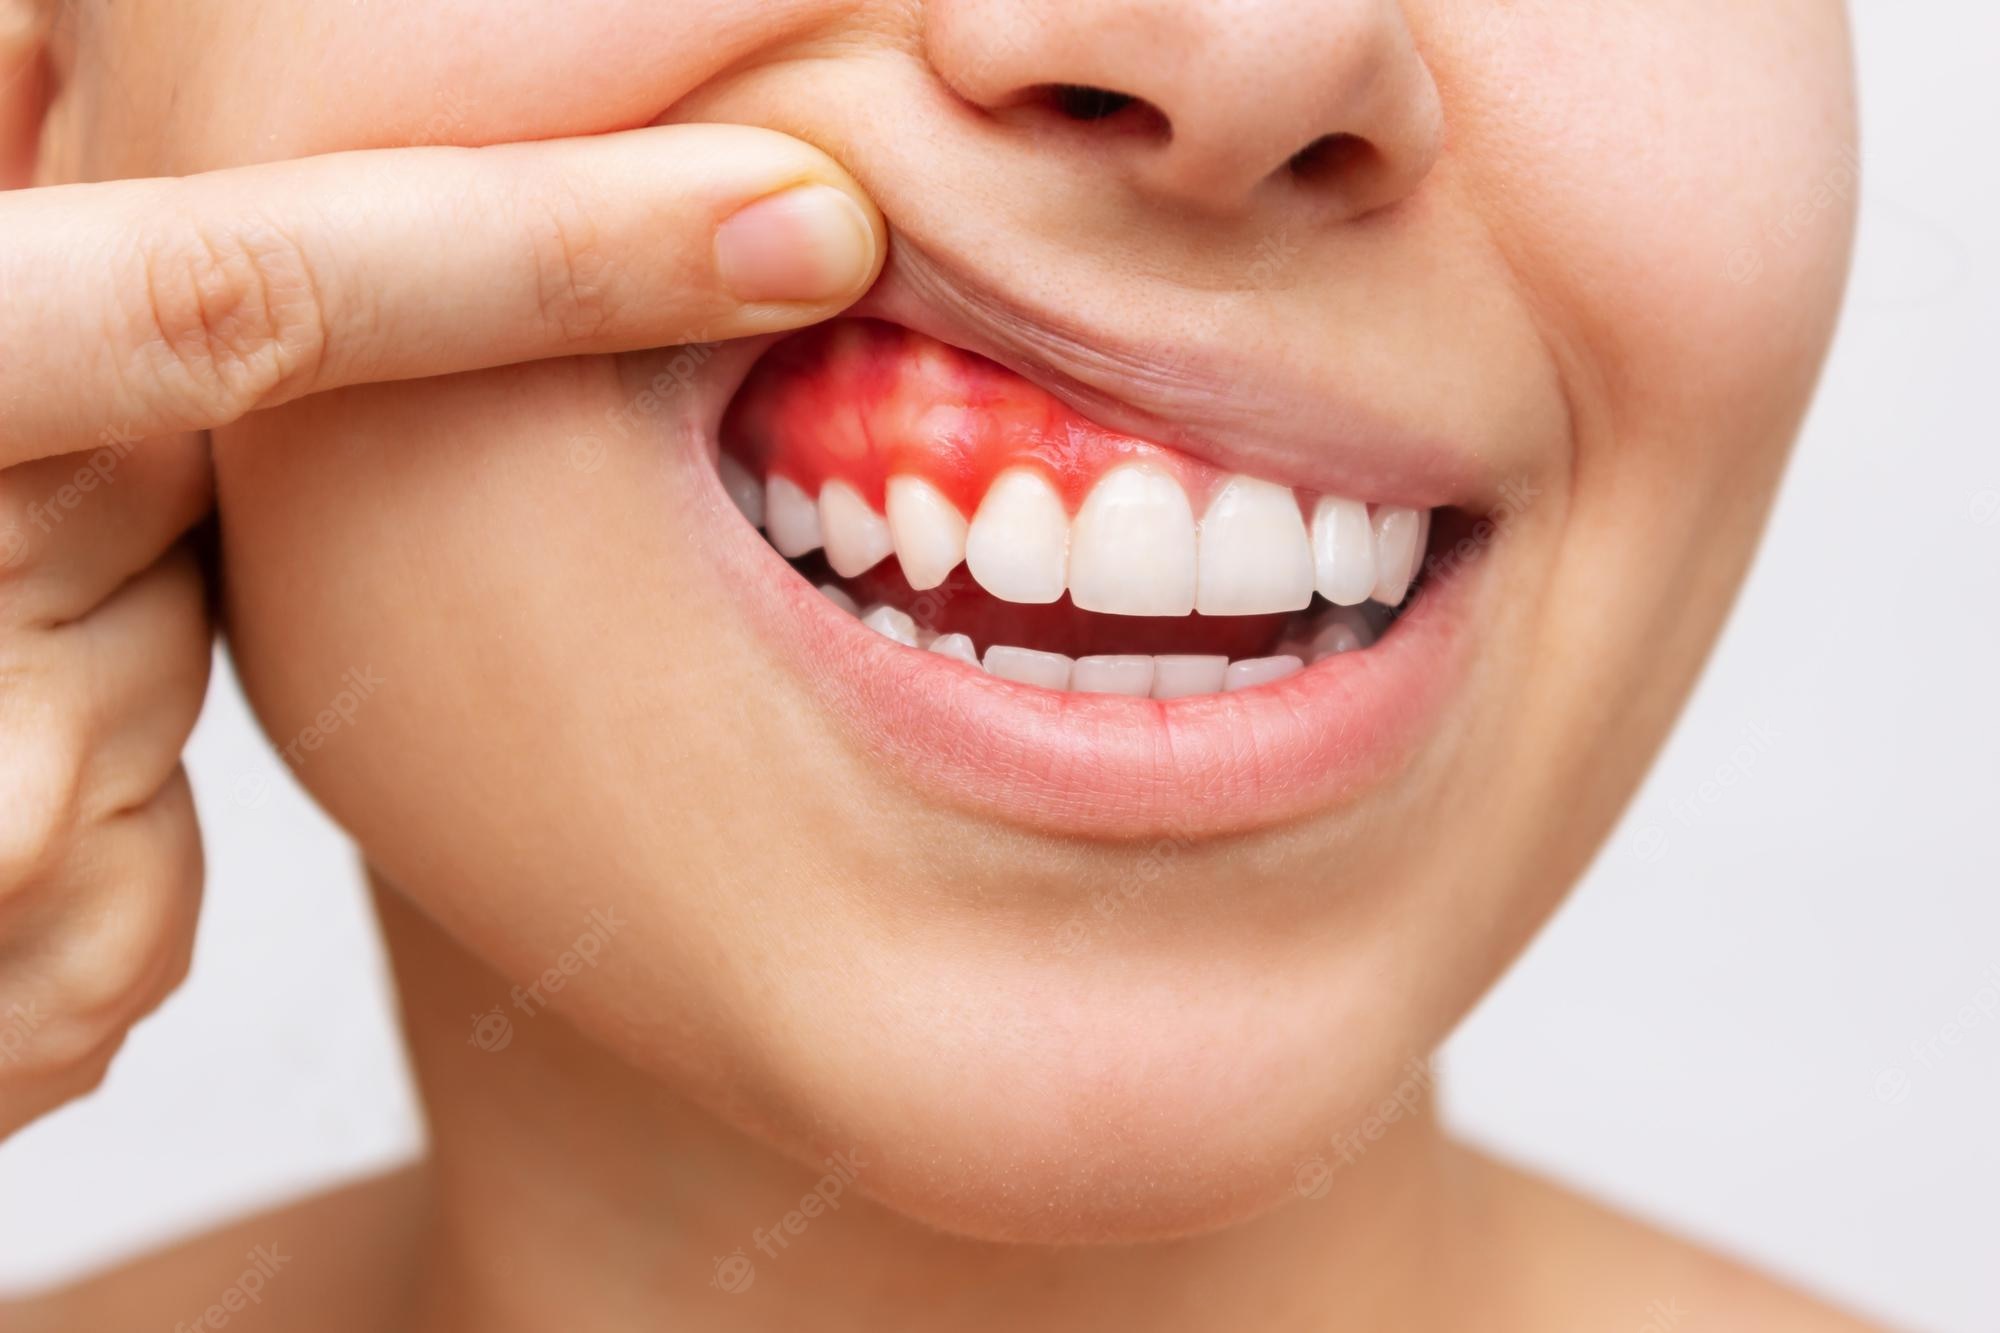 Bleeding teeth can be a sign of vitamin C deficiency, correct it with these foods.